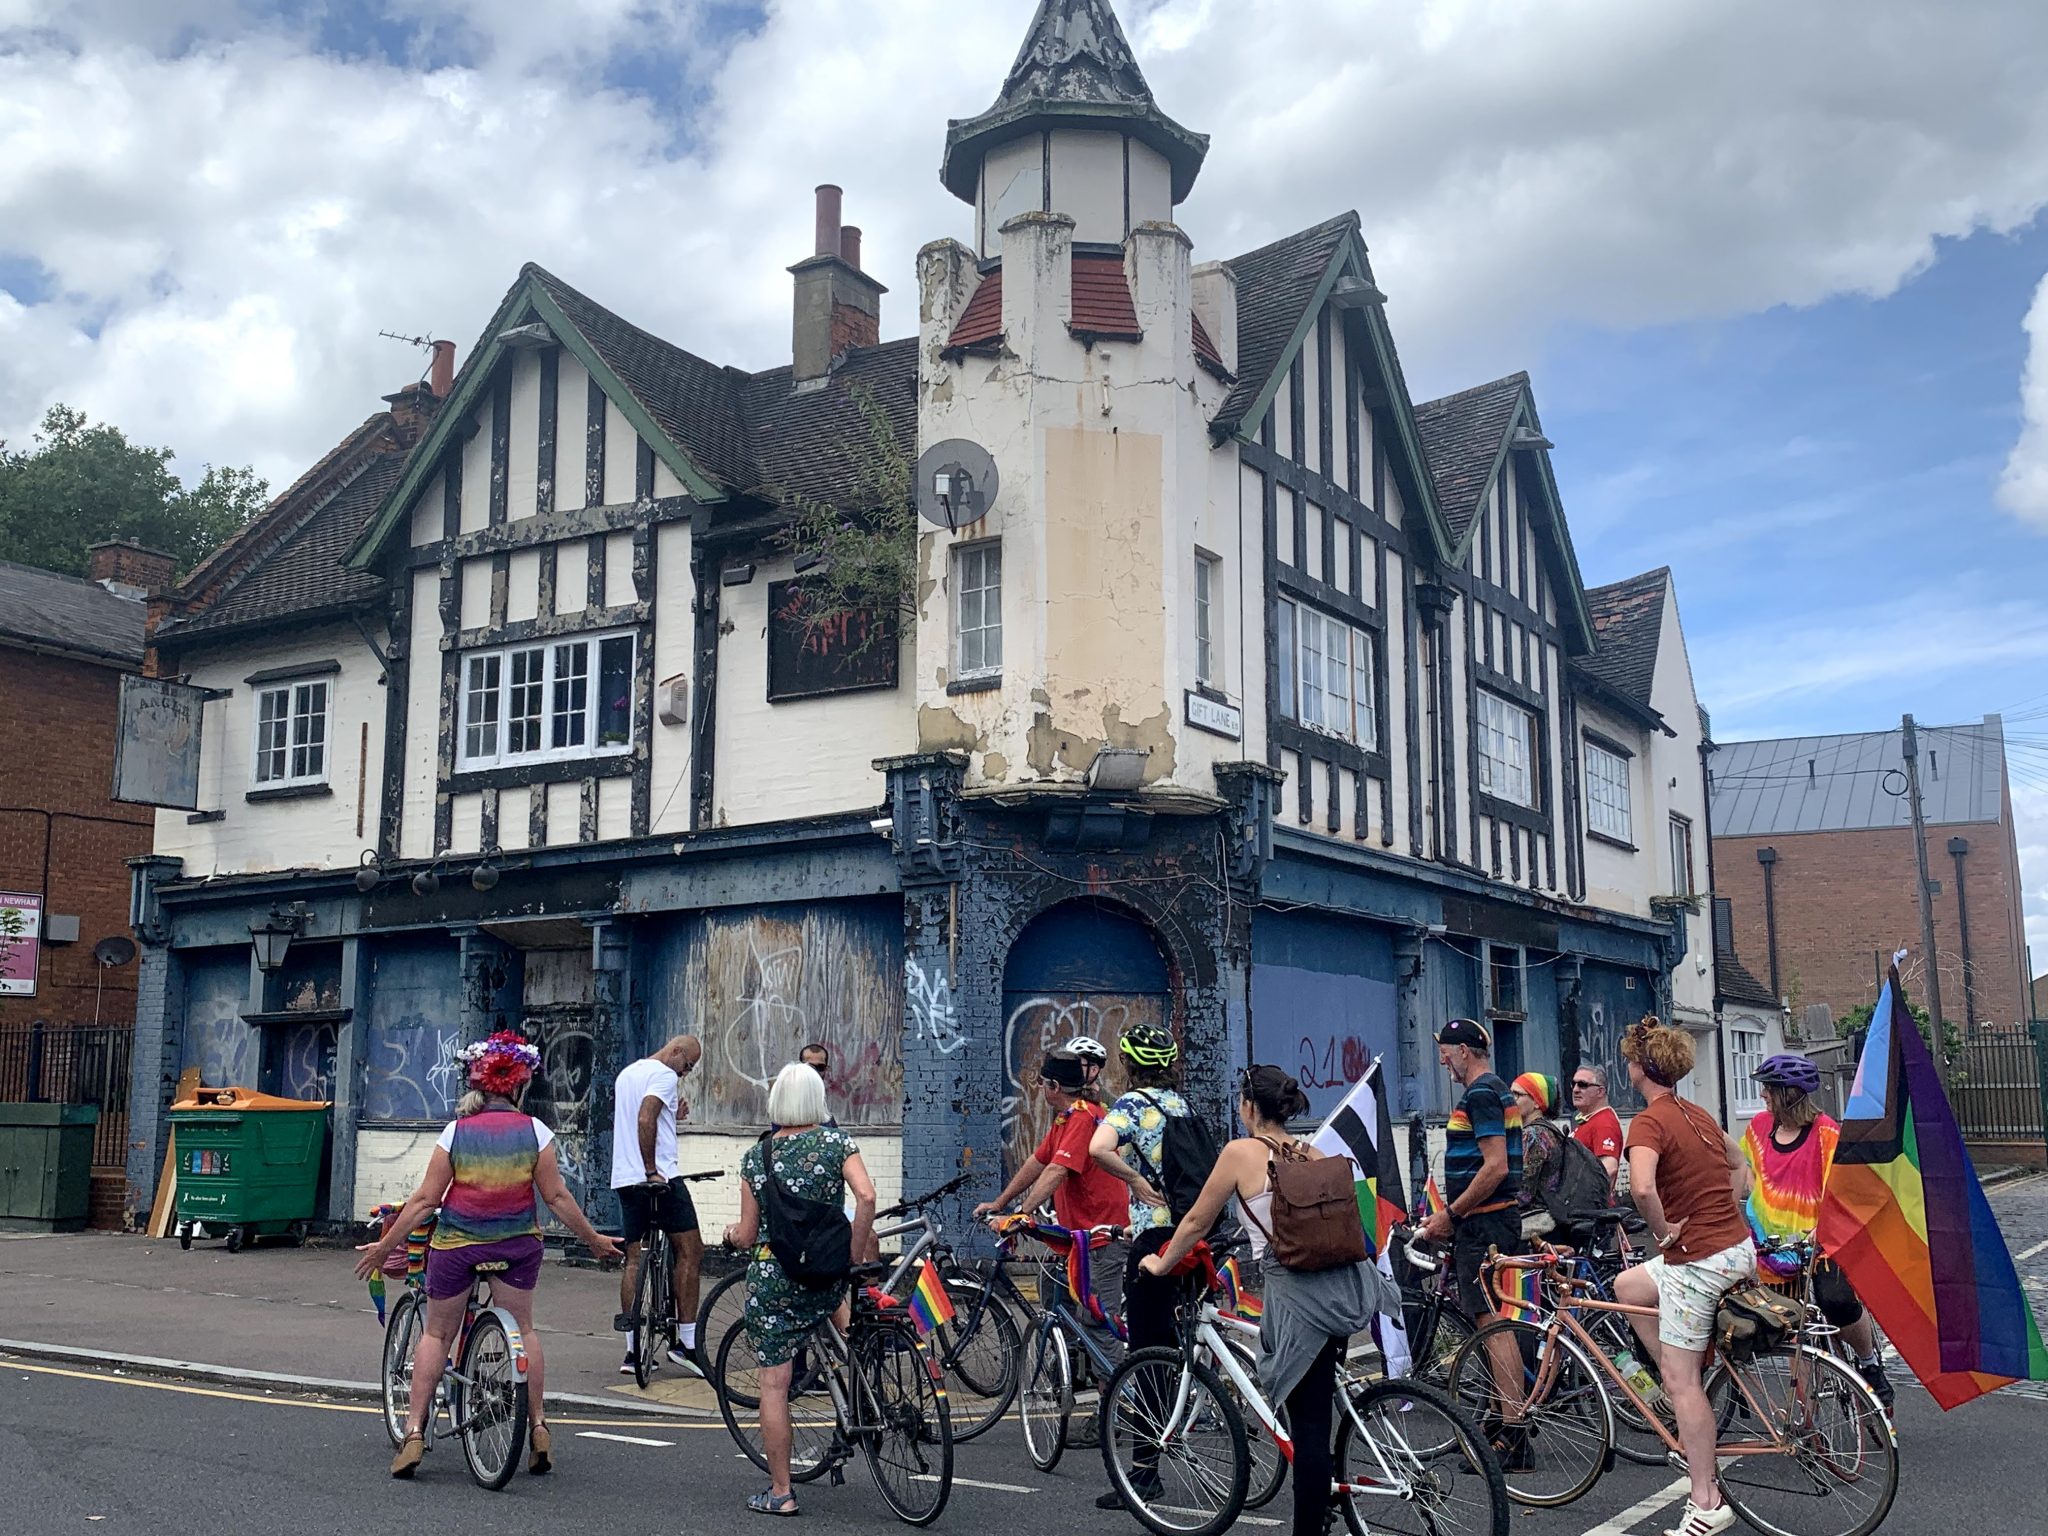 A group of cyclists outside the semi derelict pub The Angel. Some of the riders wear or carry Pride flags